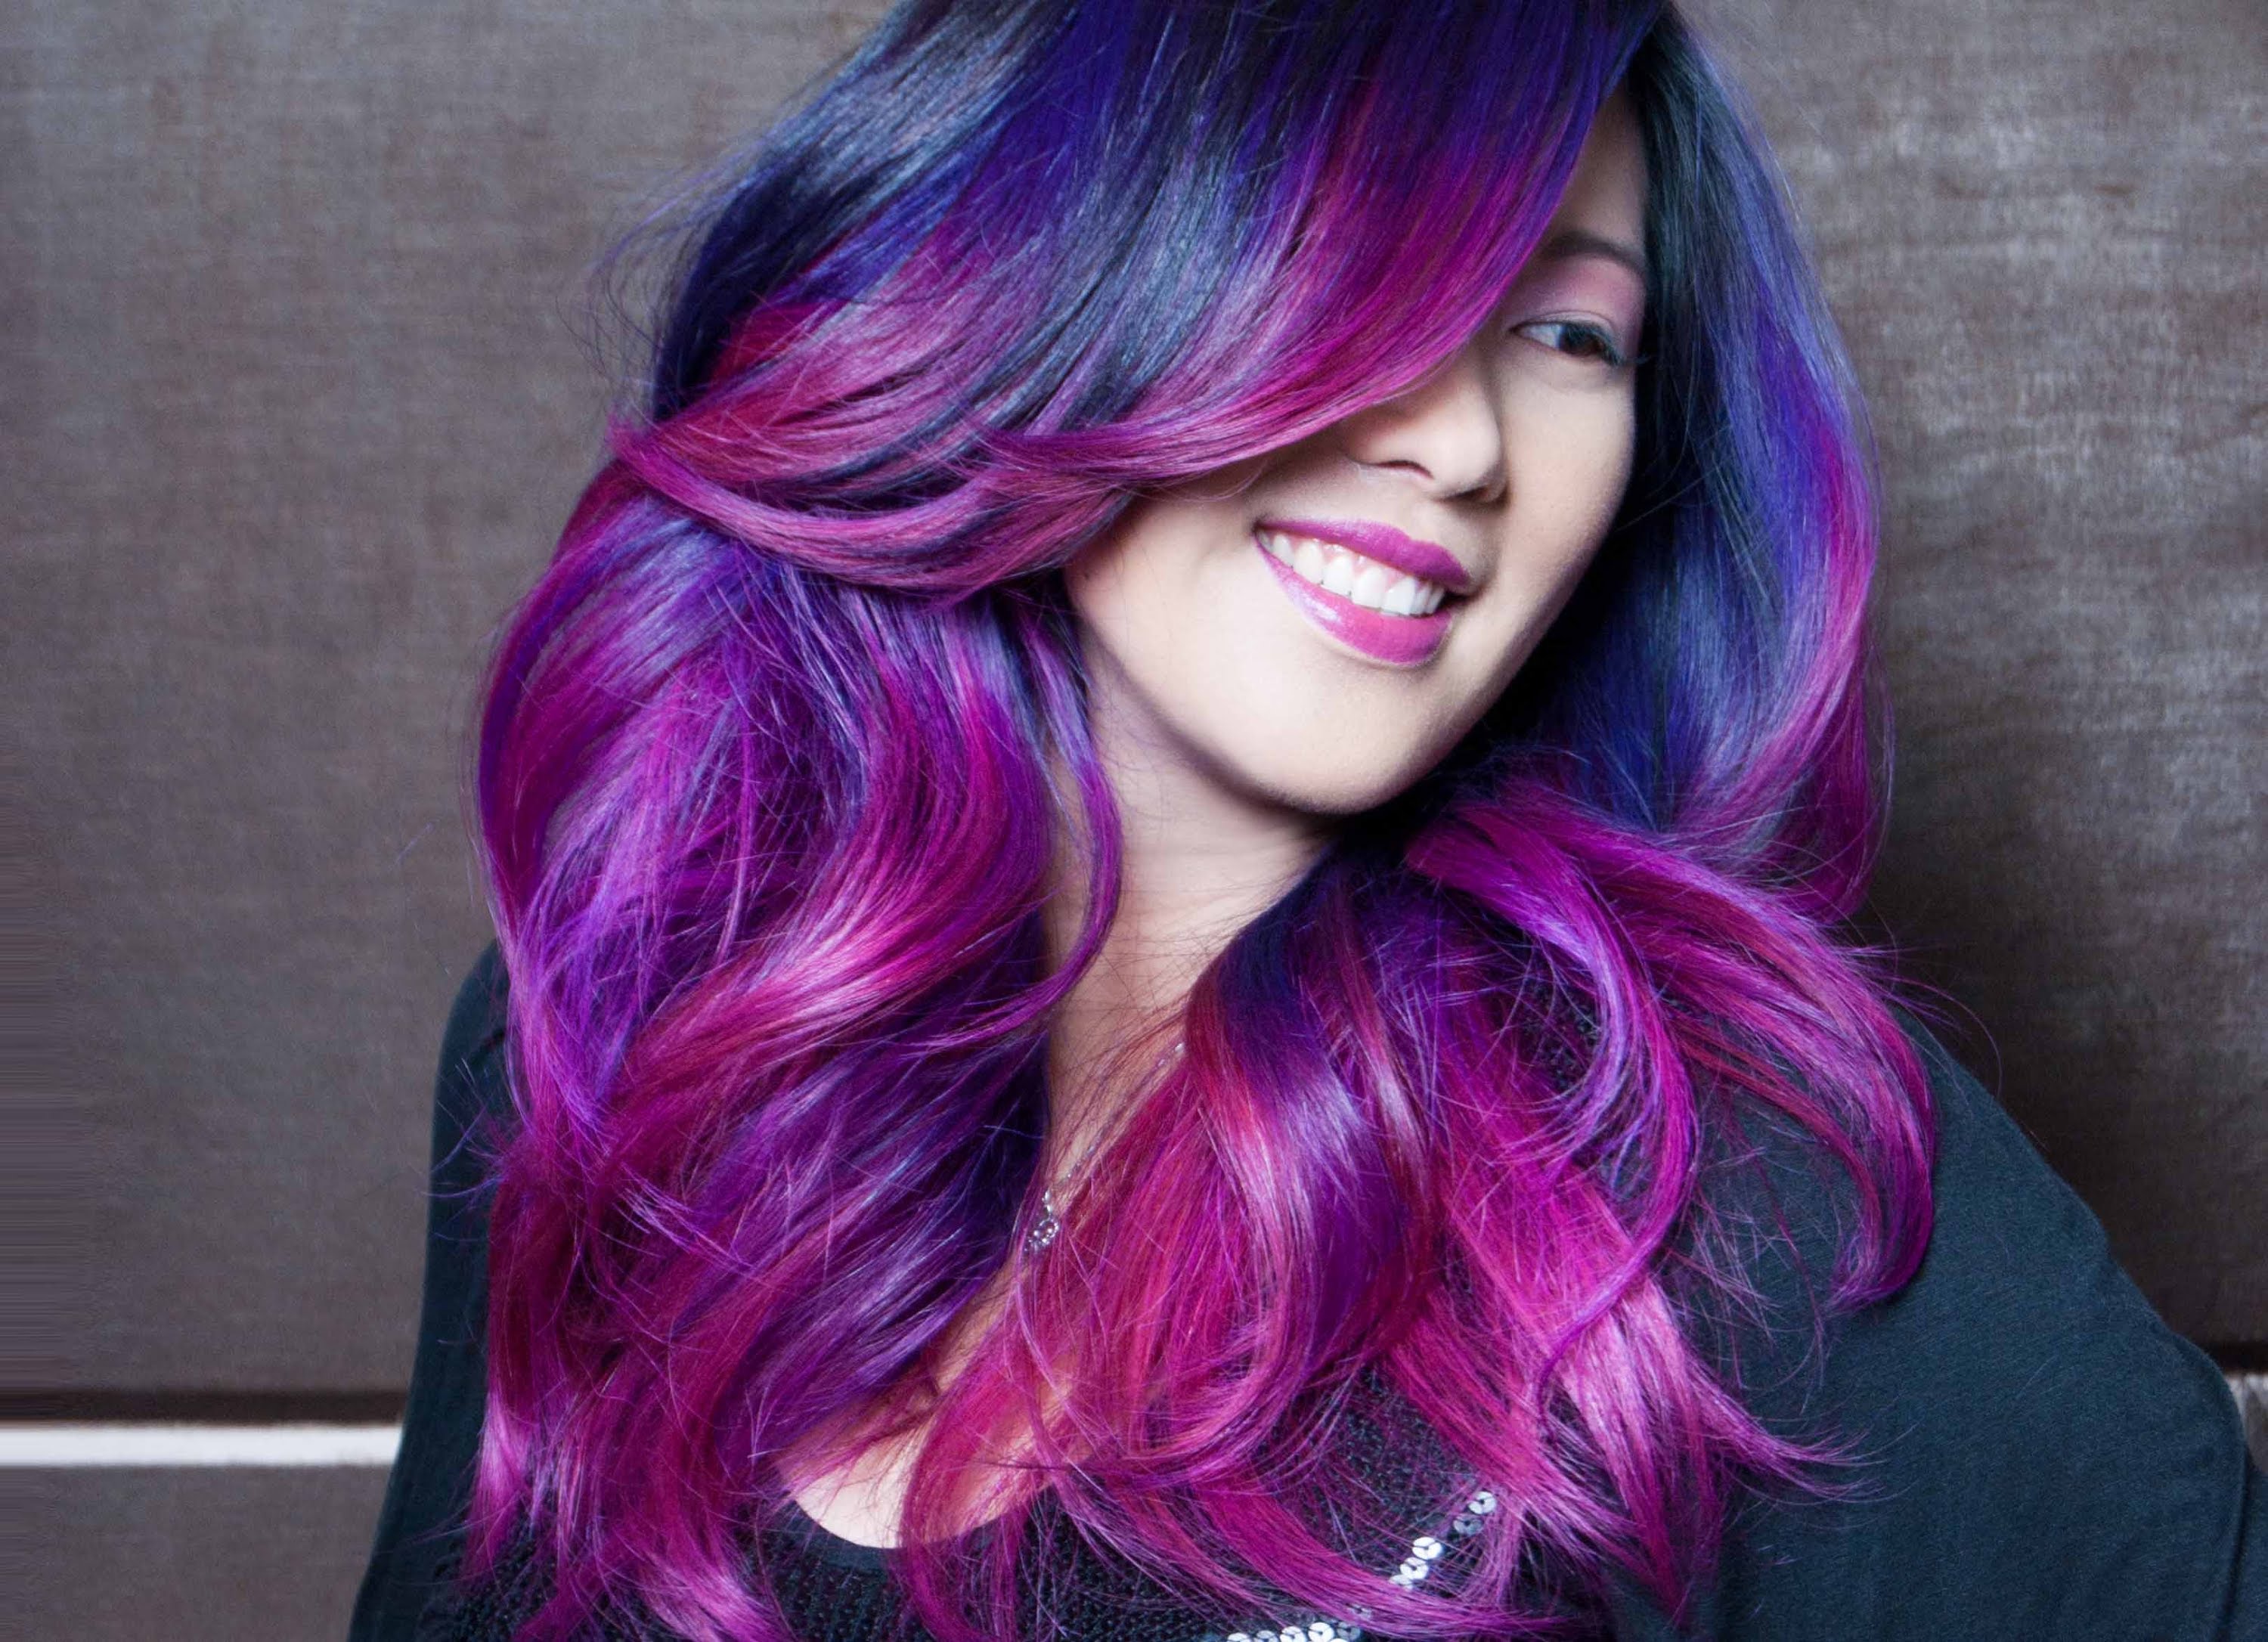 5. Splat Hair Dye Blue Ombre: How to Achieve the Perfect Ombre Look - wide 3